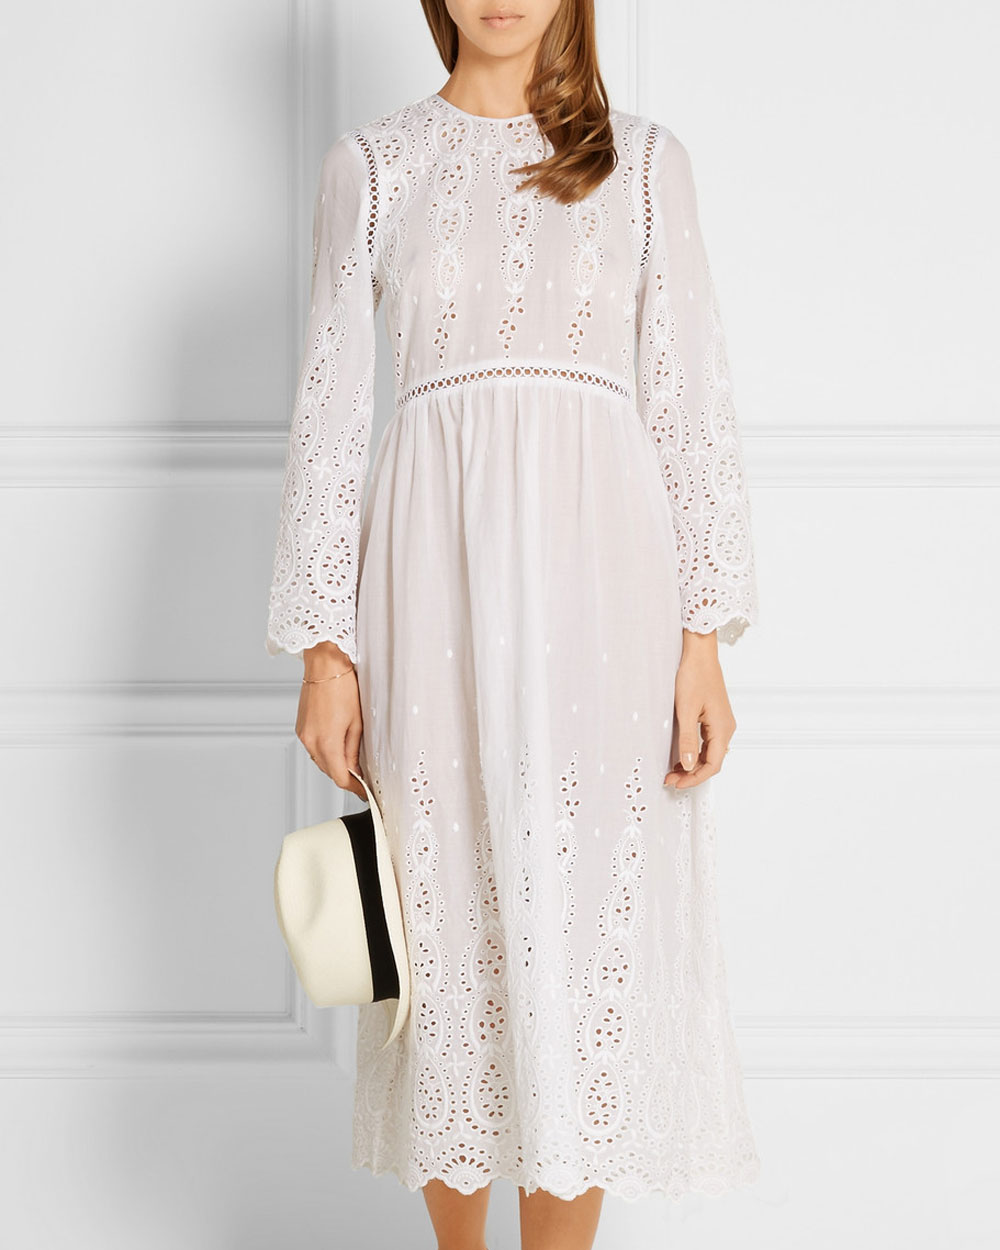 Zimmerman broderie anglaise dress from Net-a-Porter